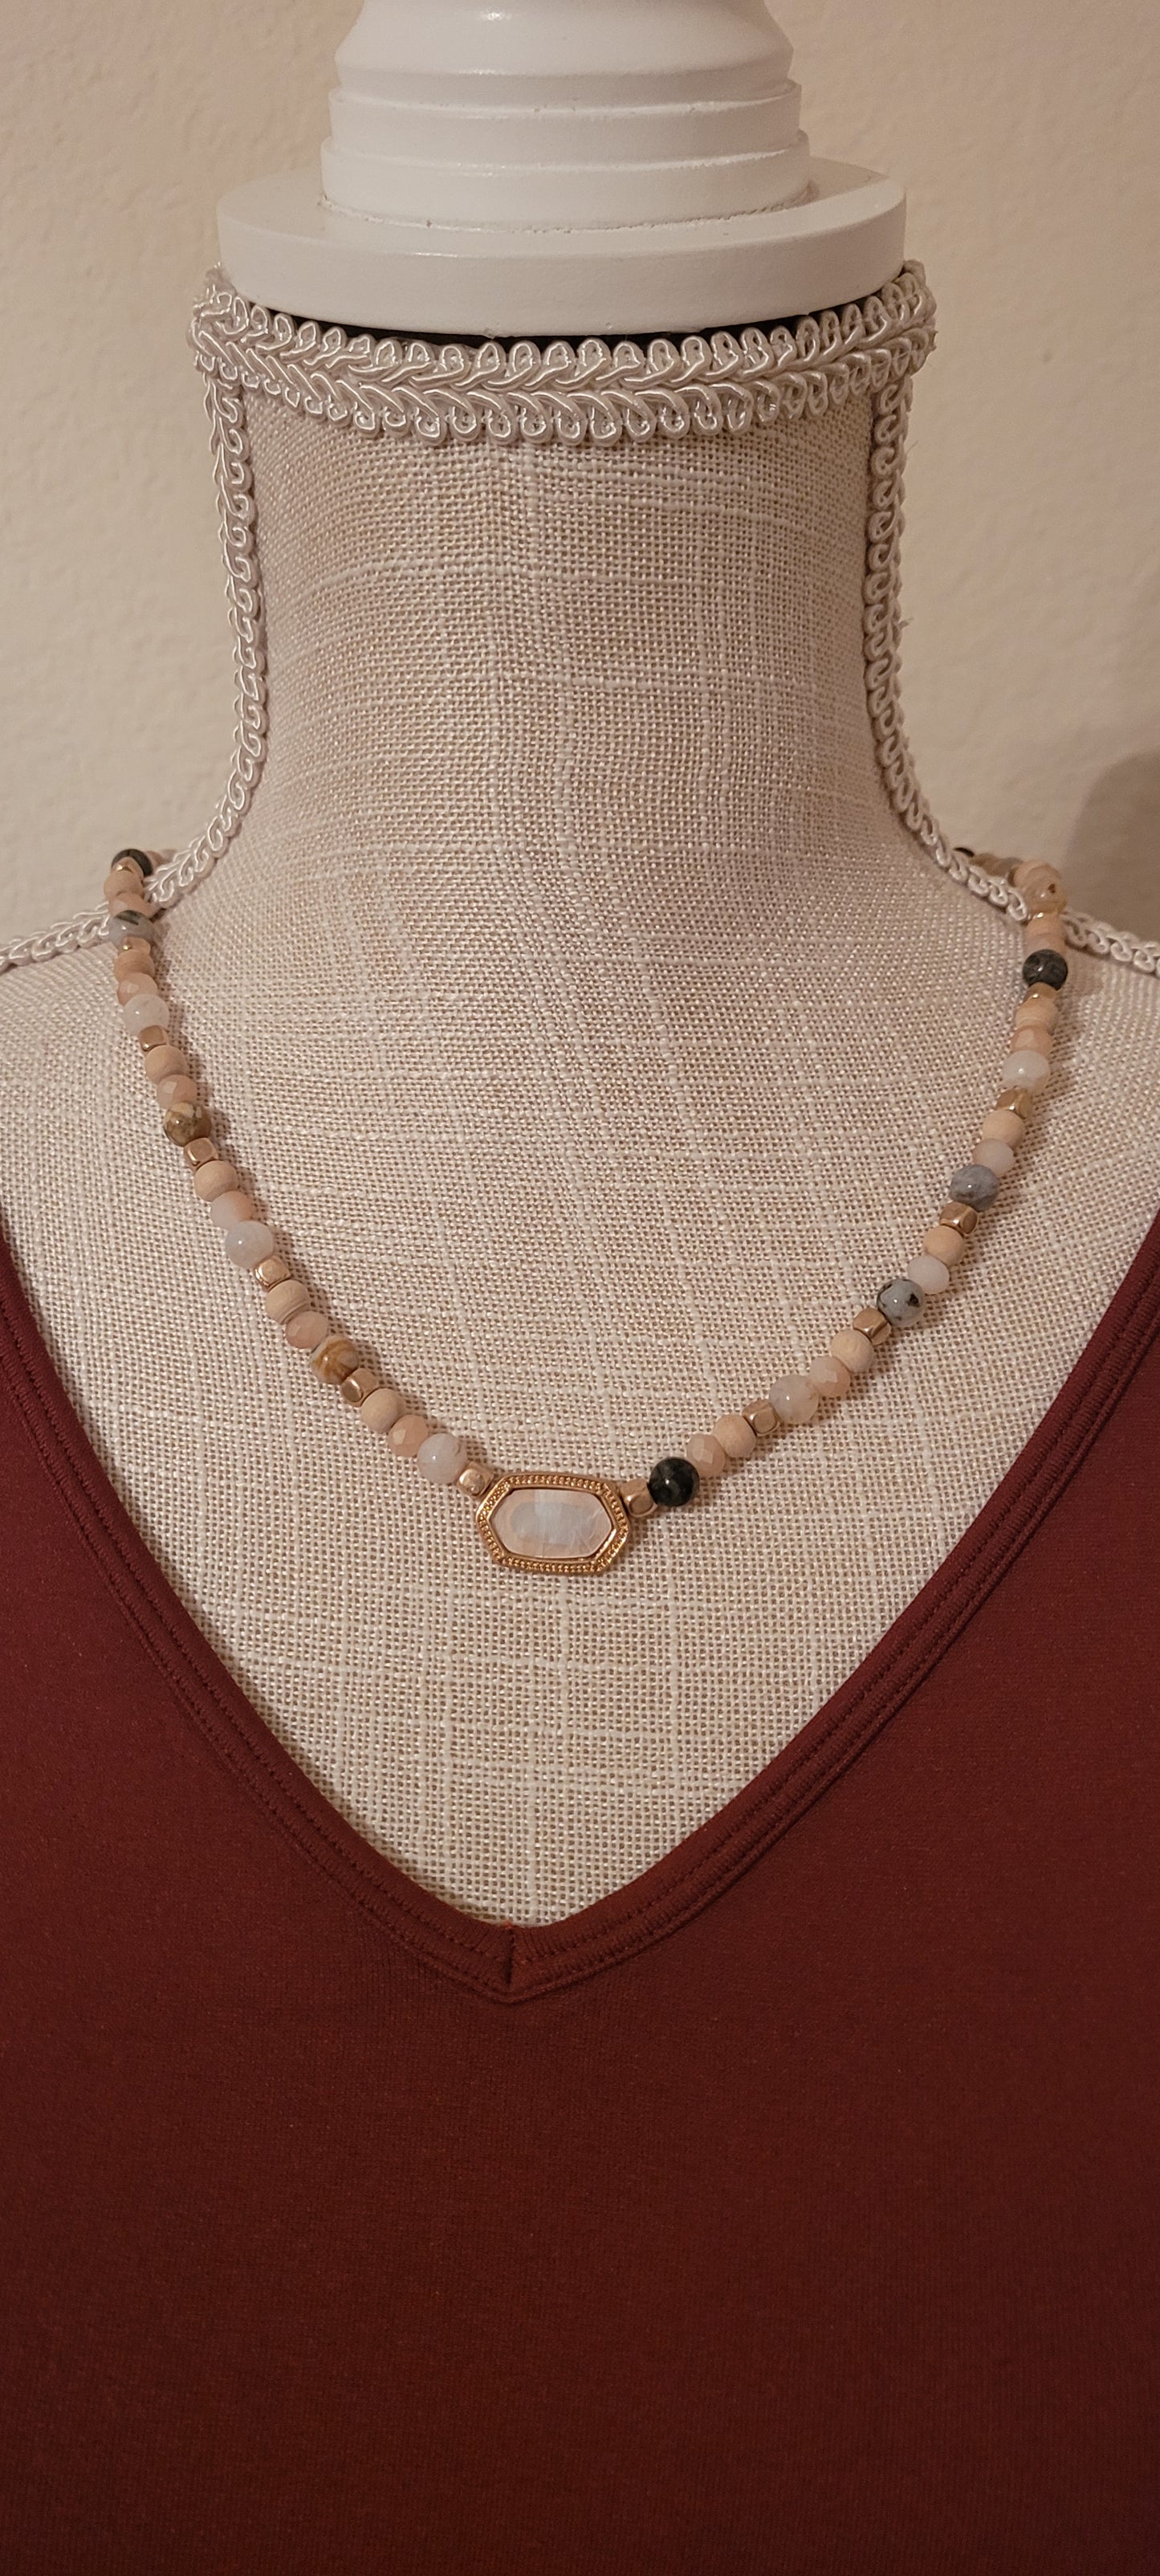 Adjustable Color: Gold chain, natural color beads & stones Limited supply!  